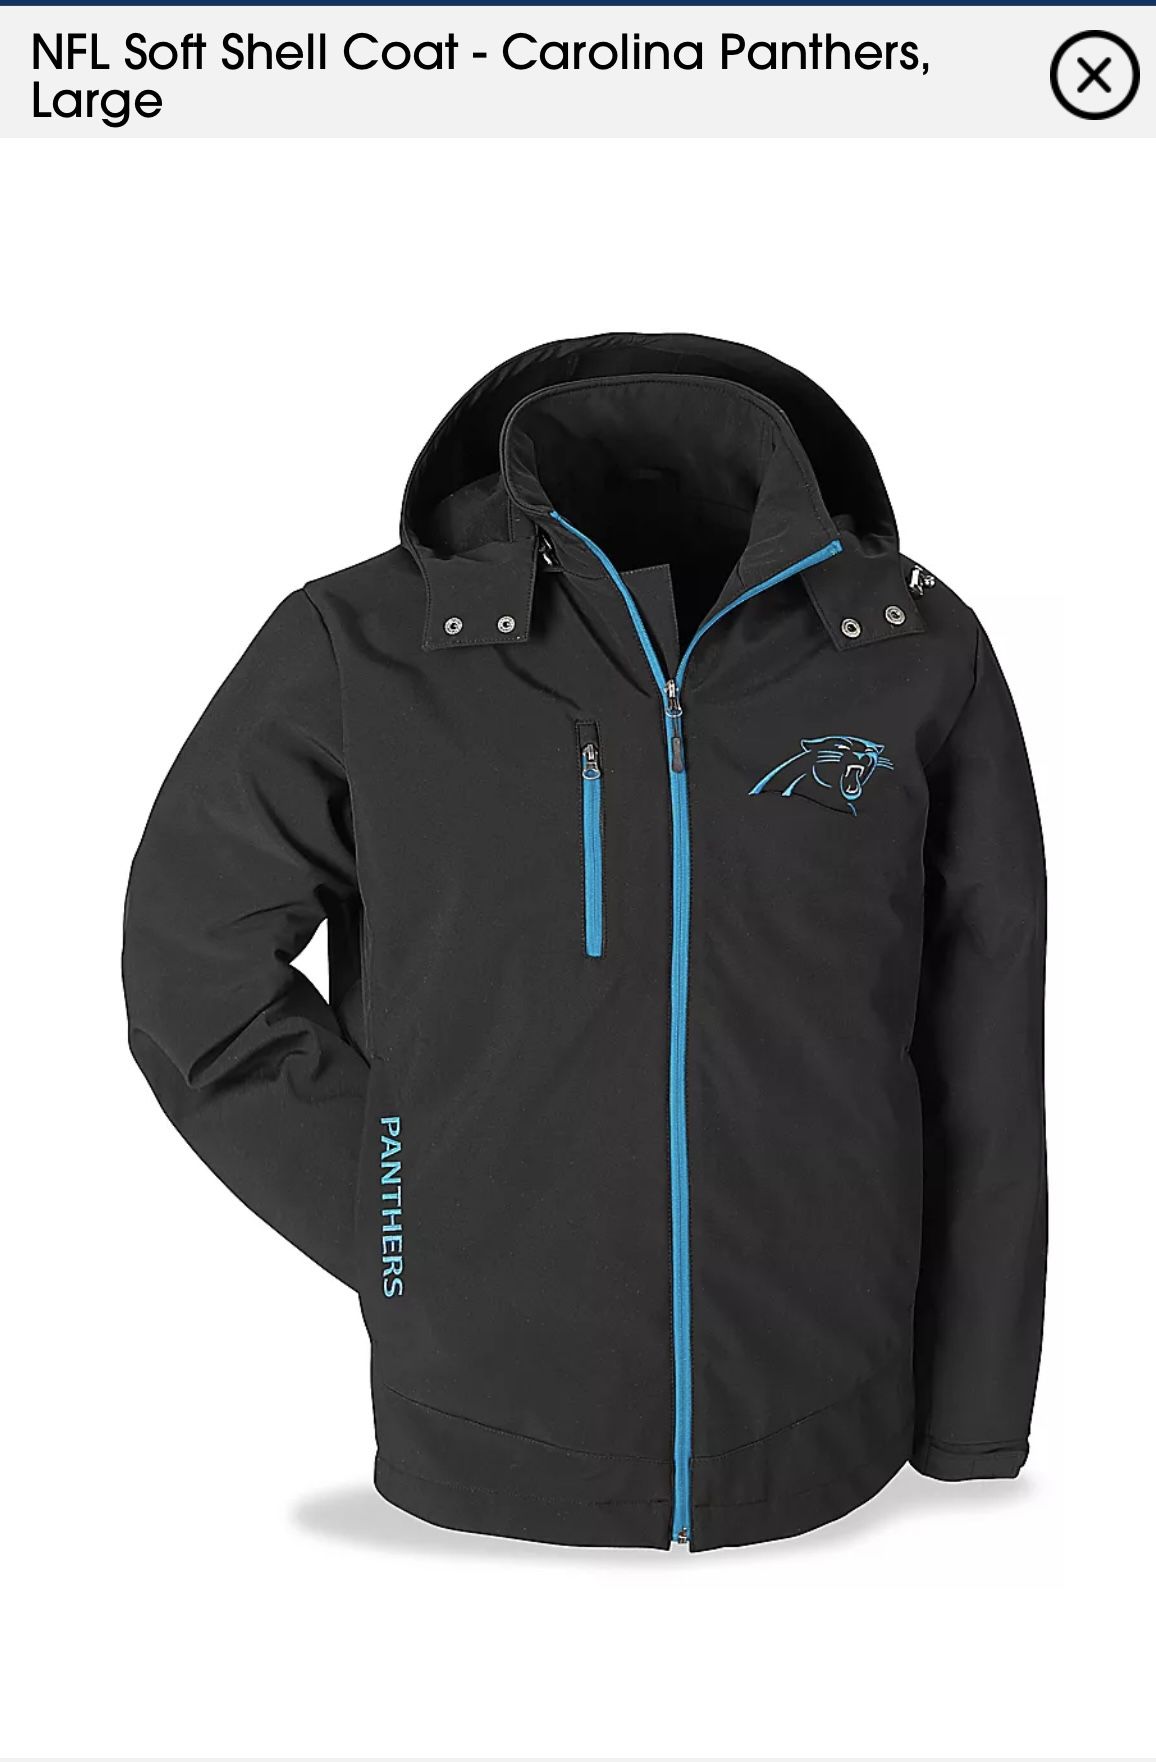 Panthers NFL Soft Shell Coat XL